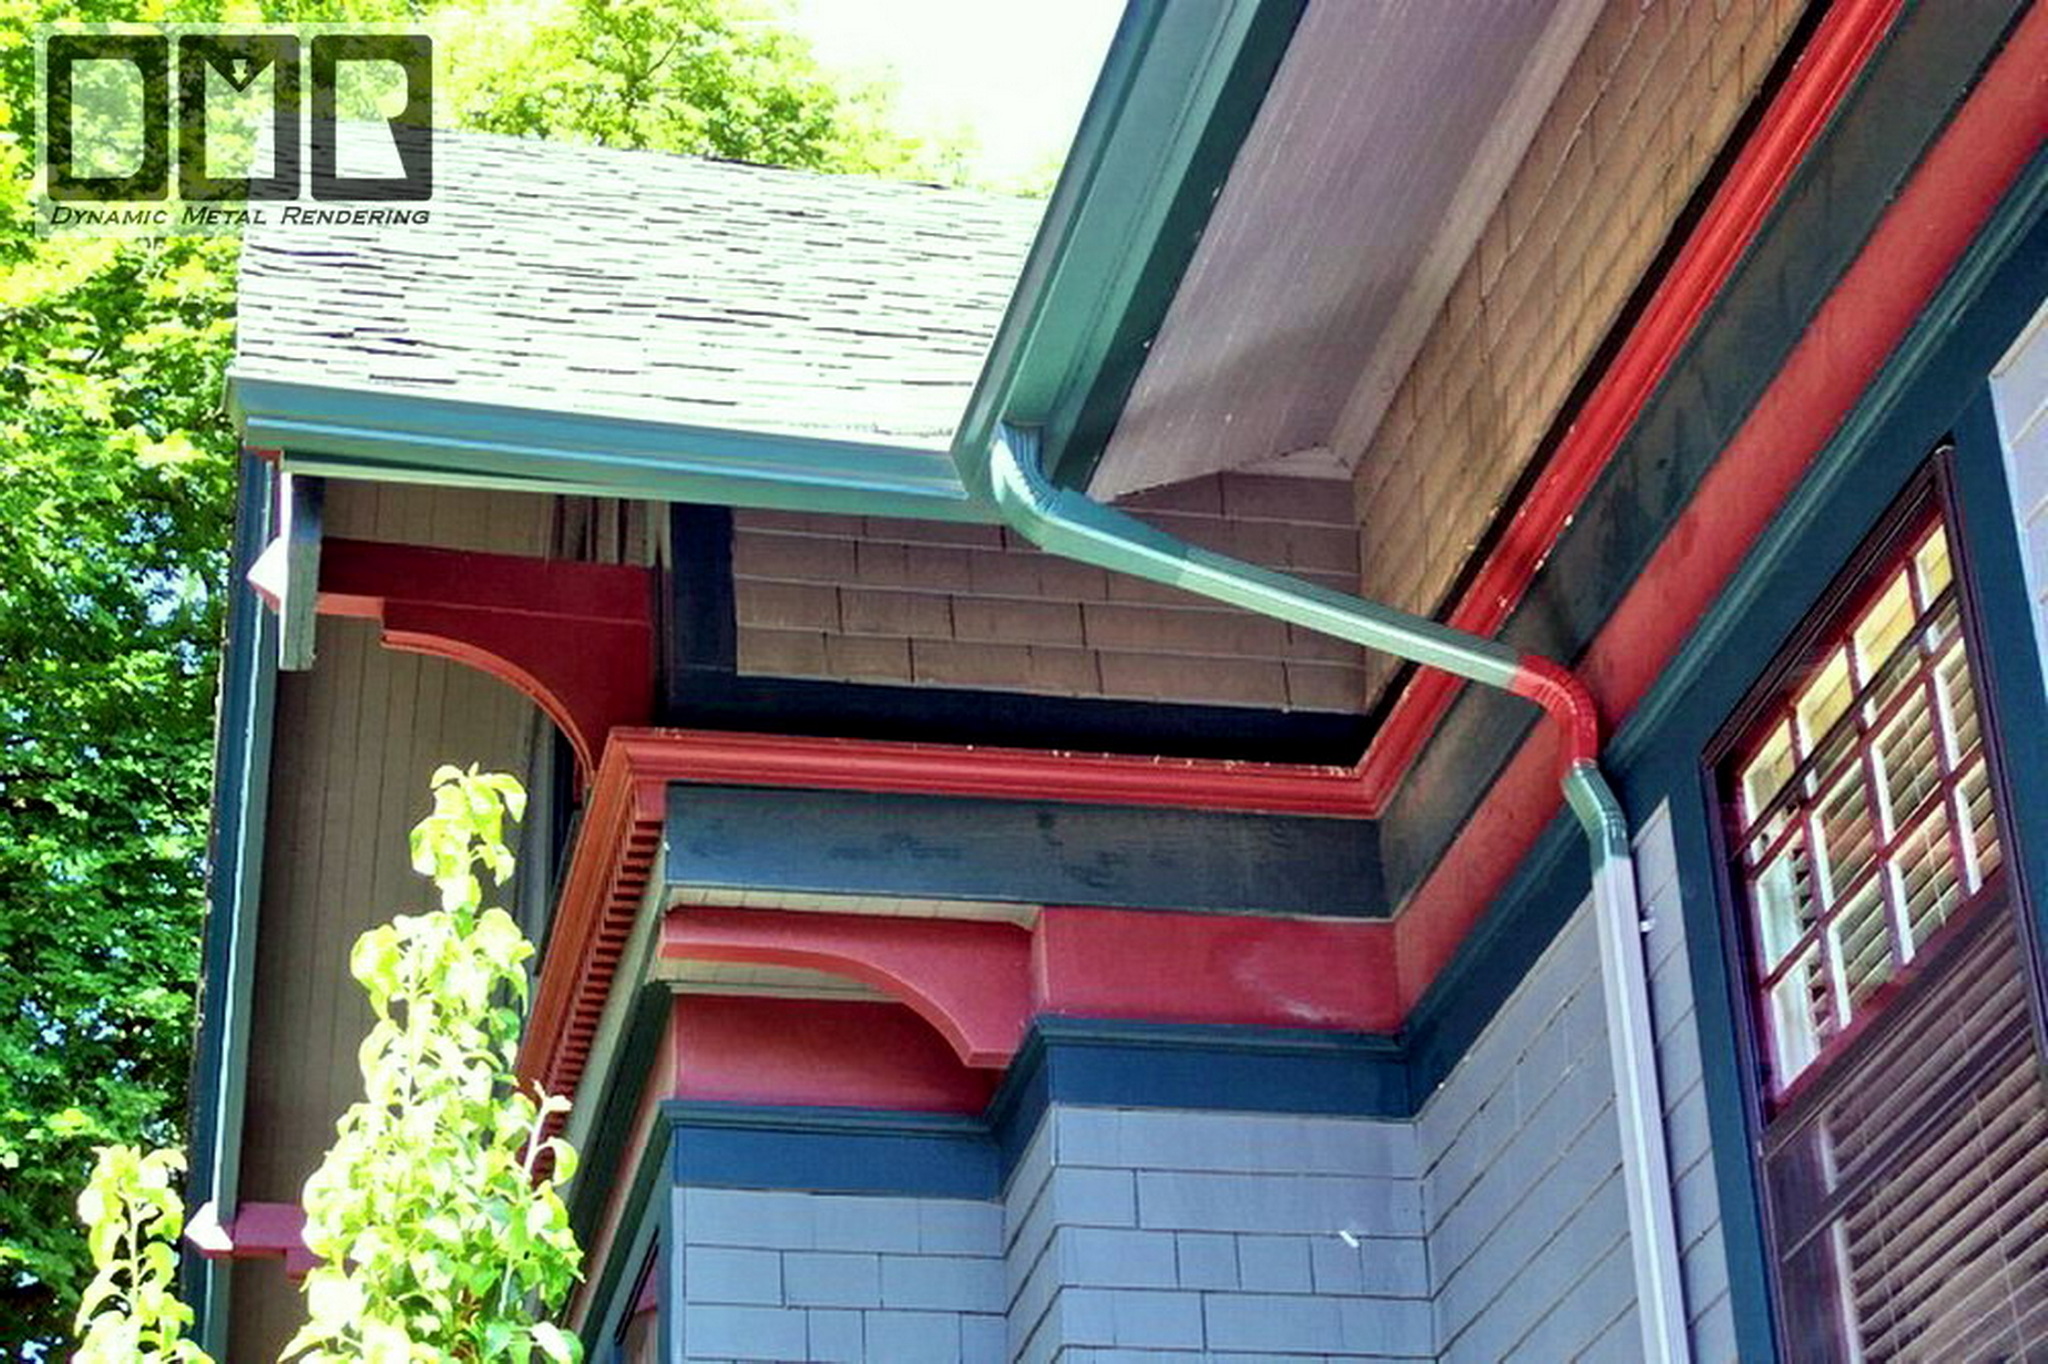  try and make gutters and downspouts look right on the houses we service.